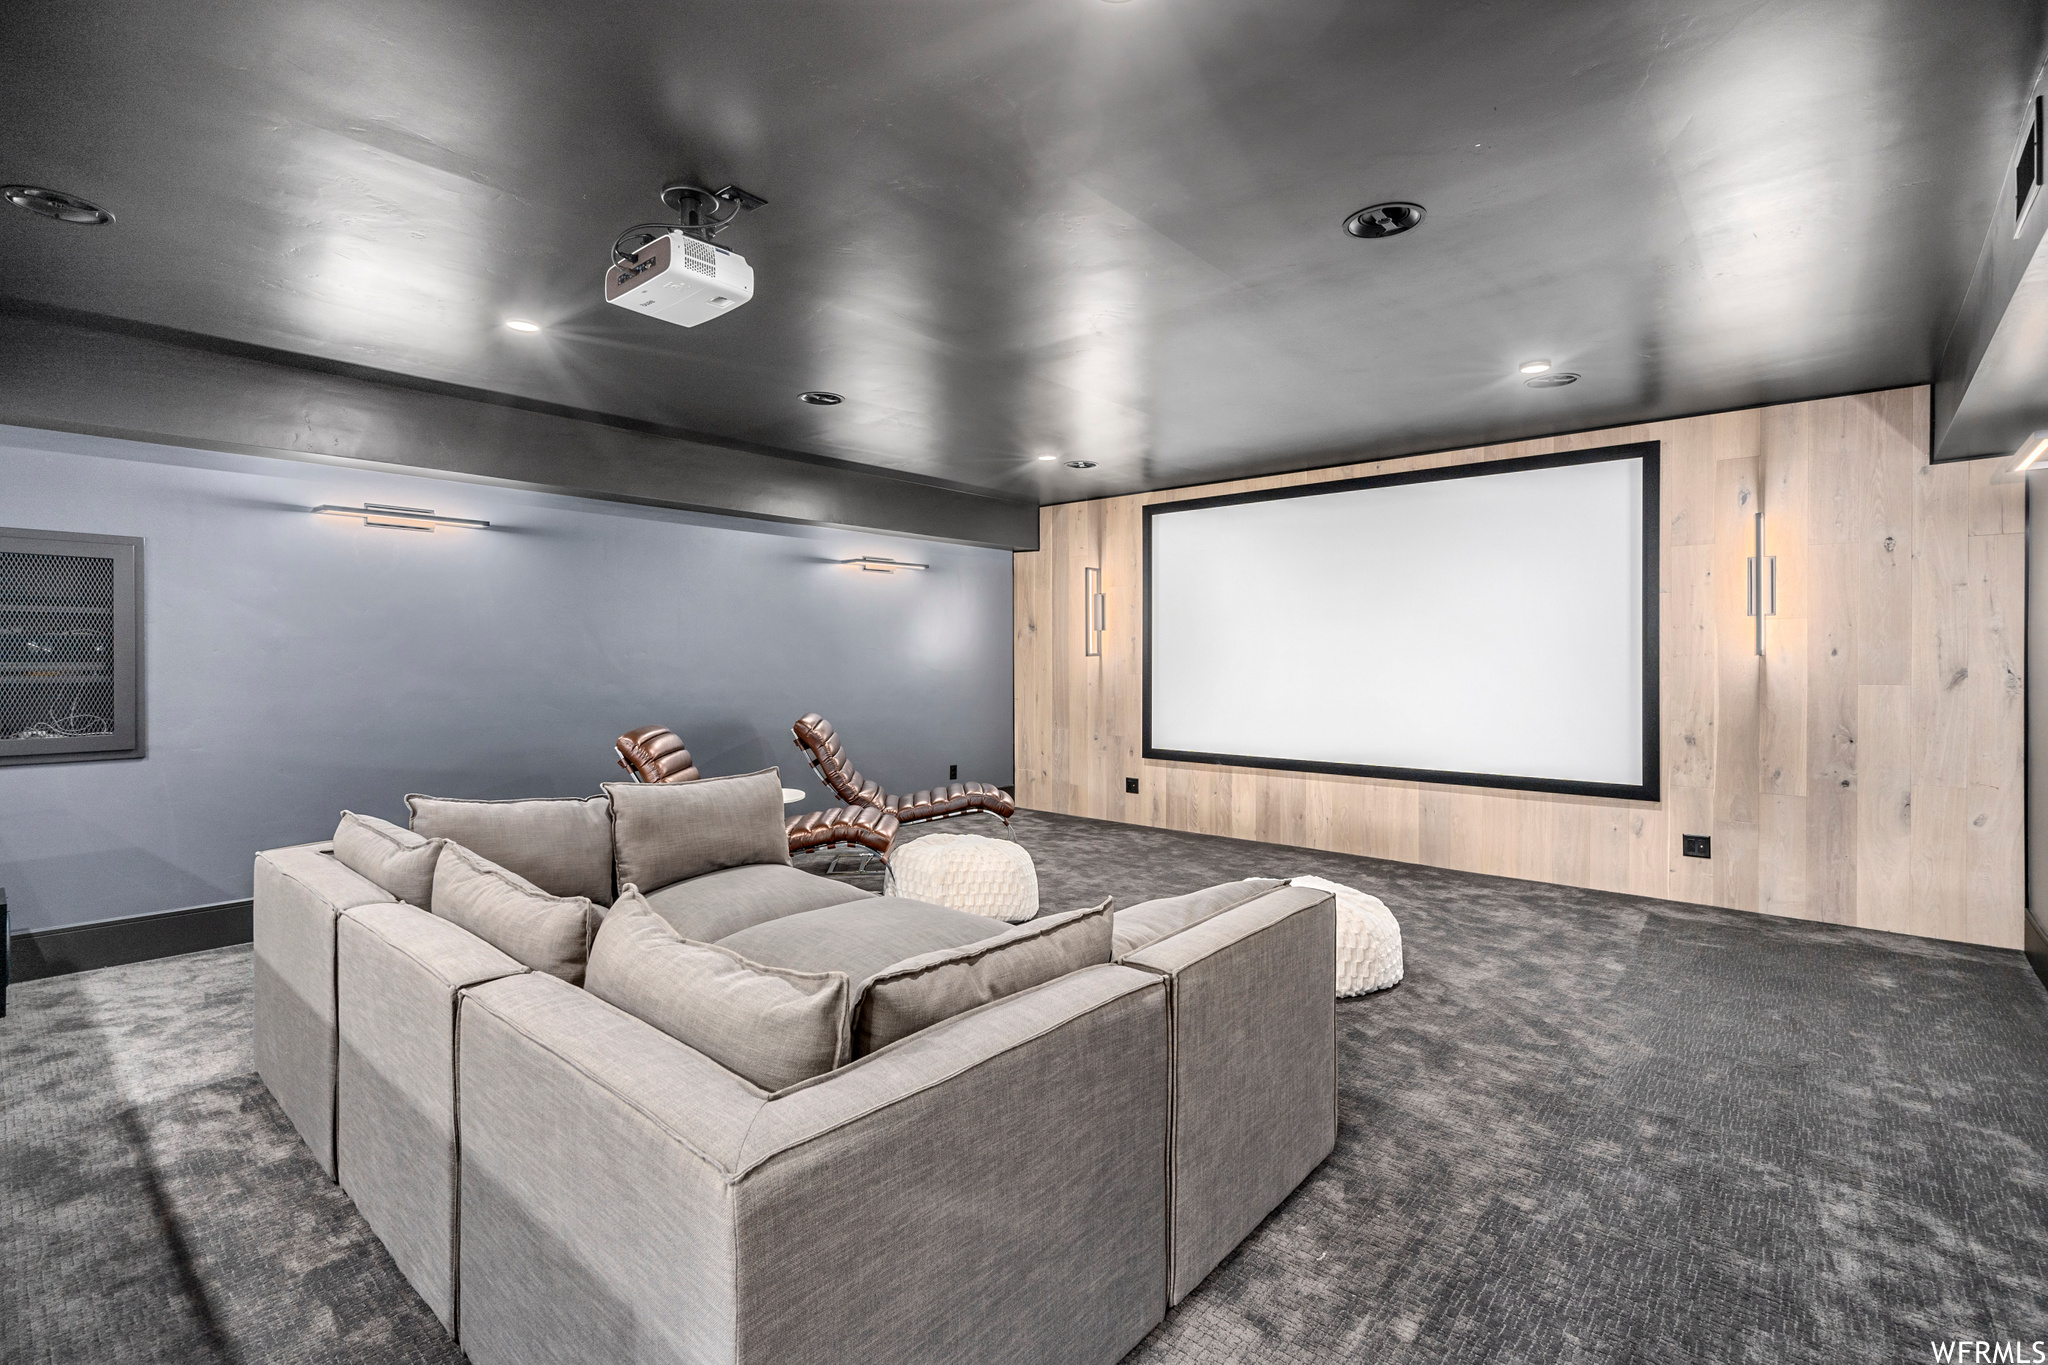 Finished theater room with a cozy spot for everyone